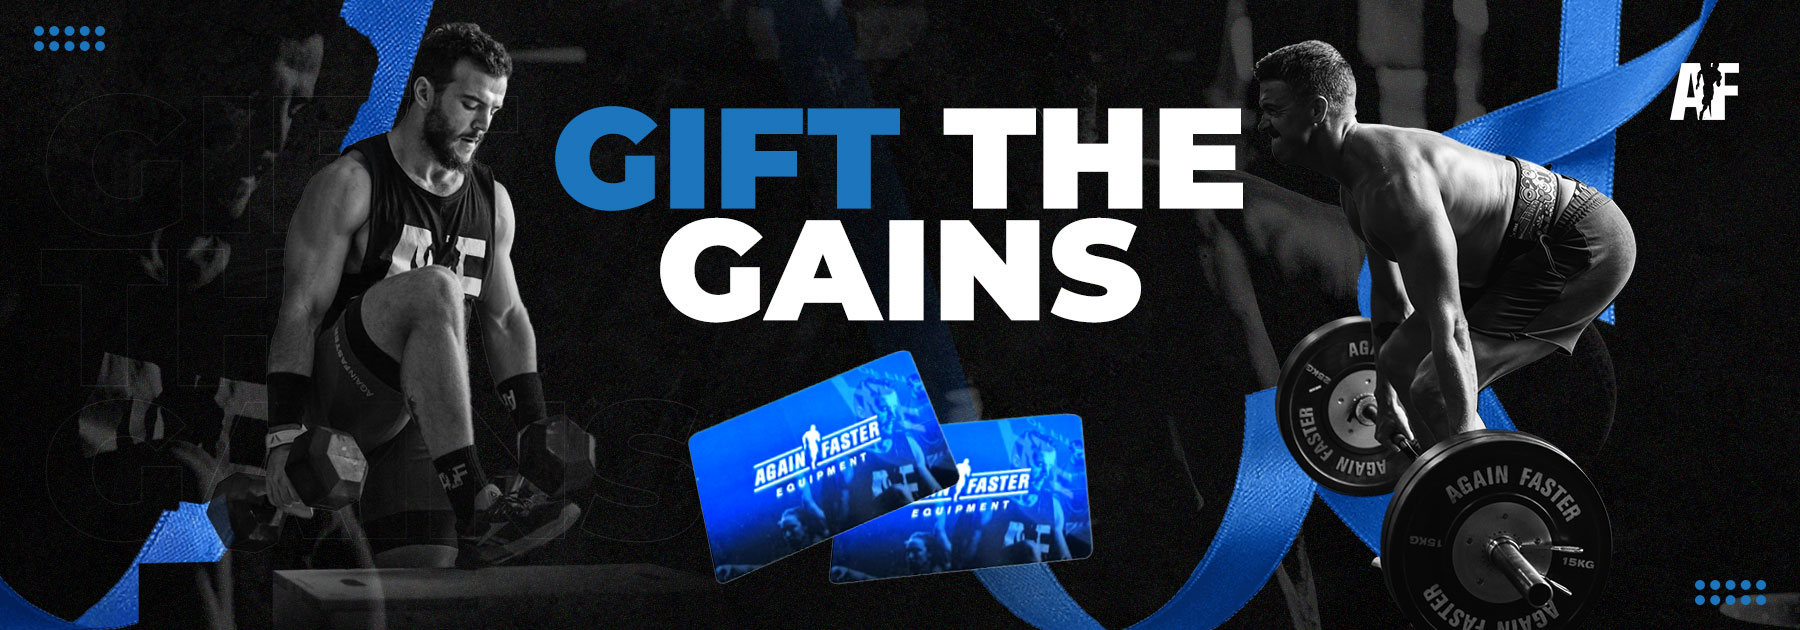 GIFT THE GAINS